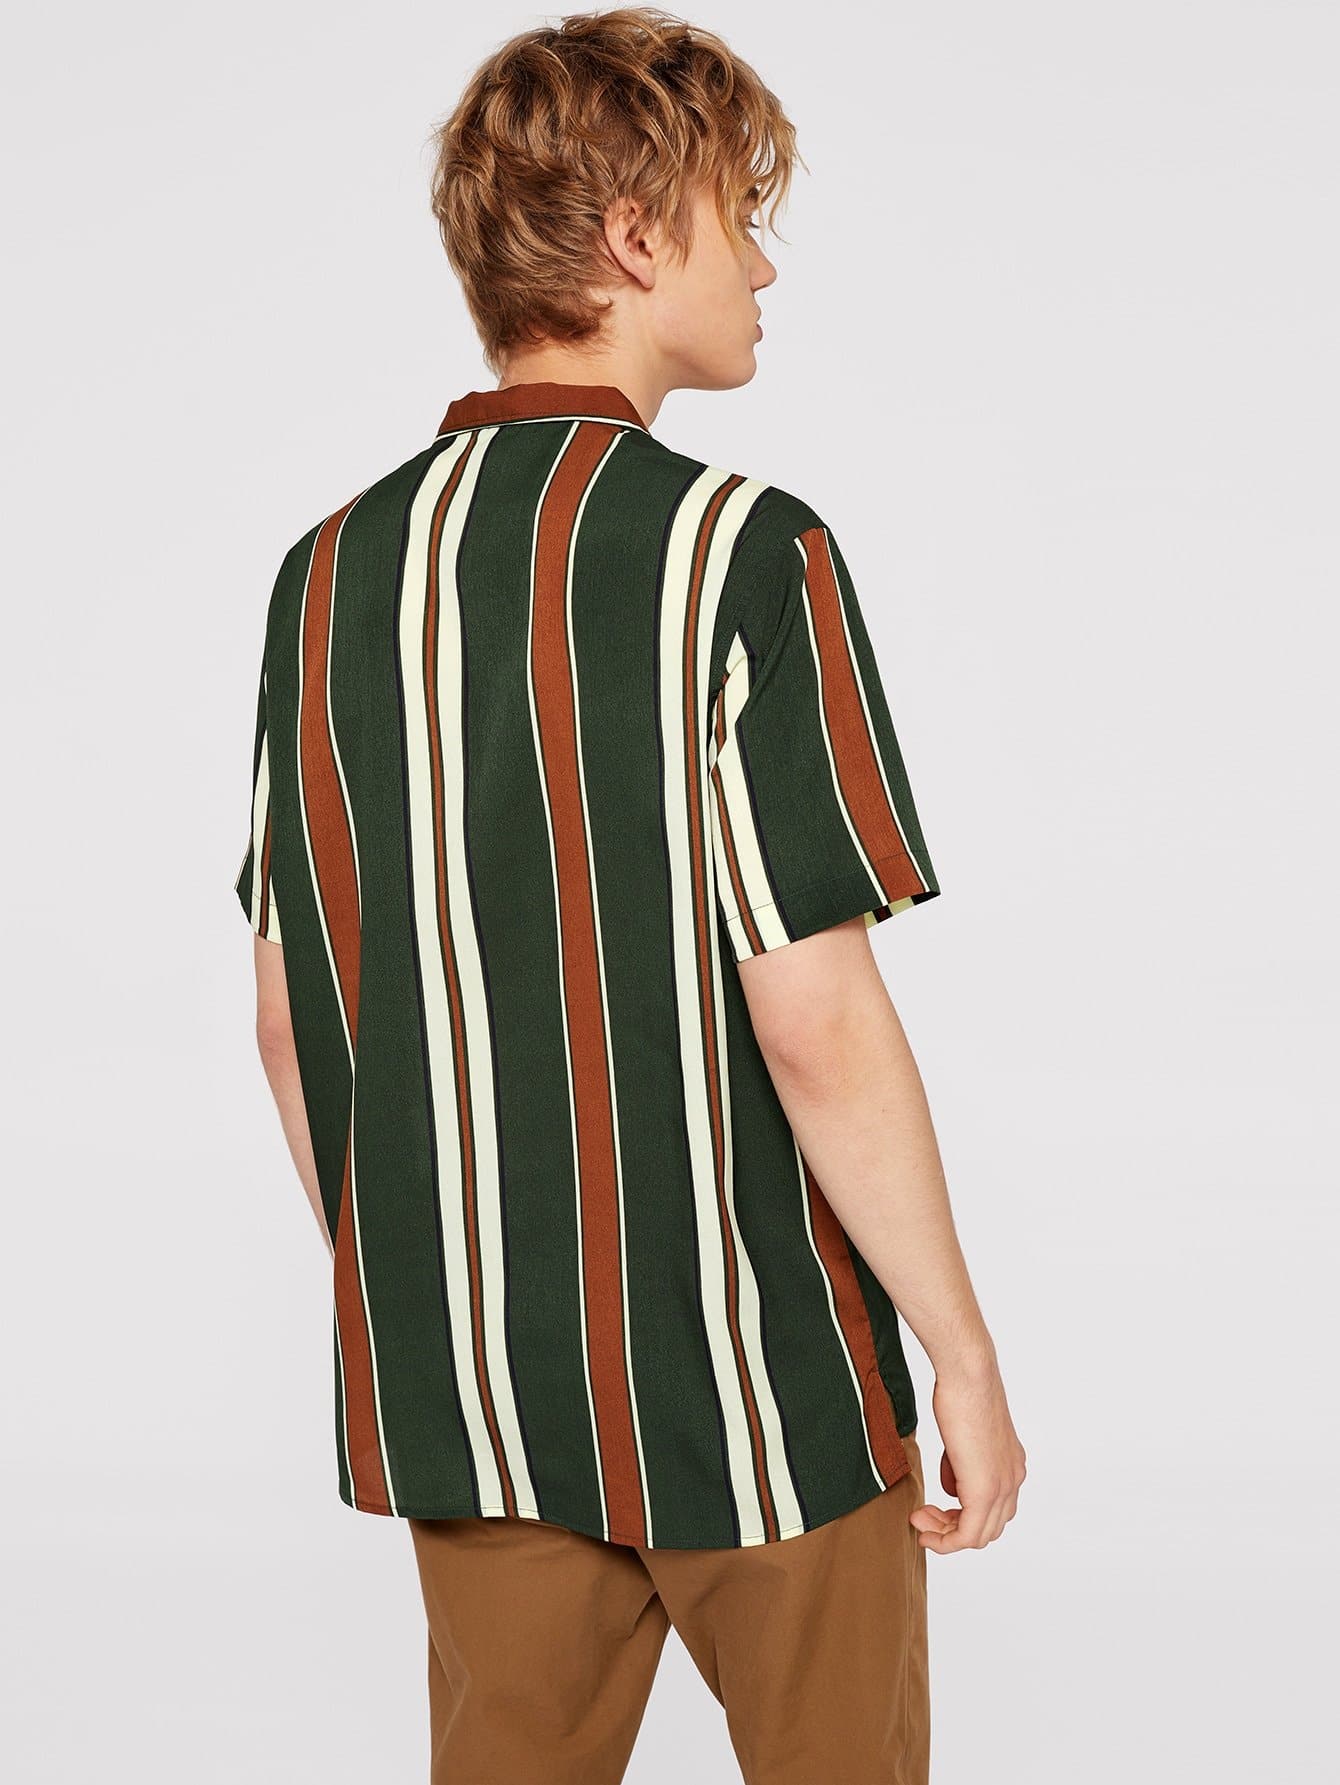 Short Sleeve Colorful Striped Shirt